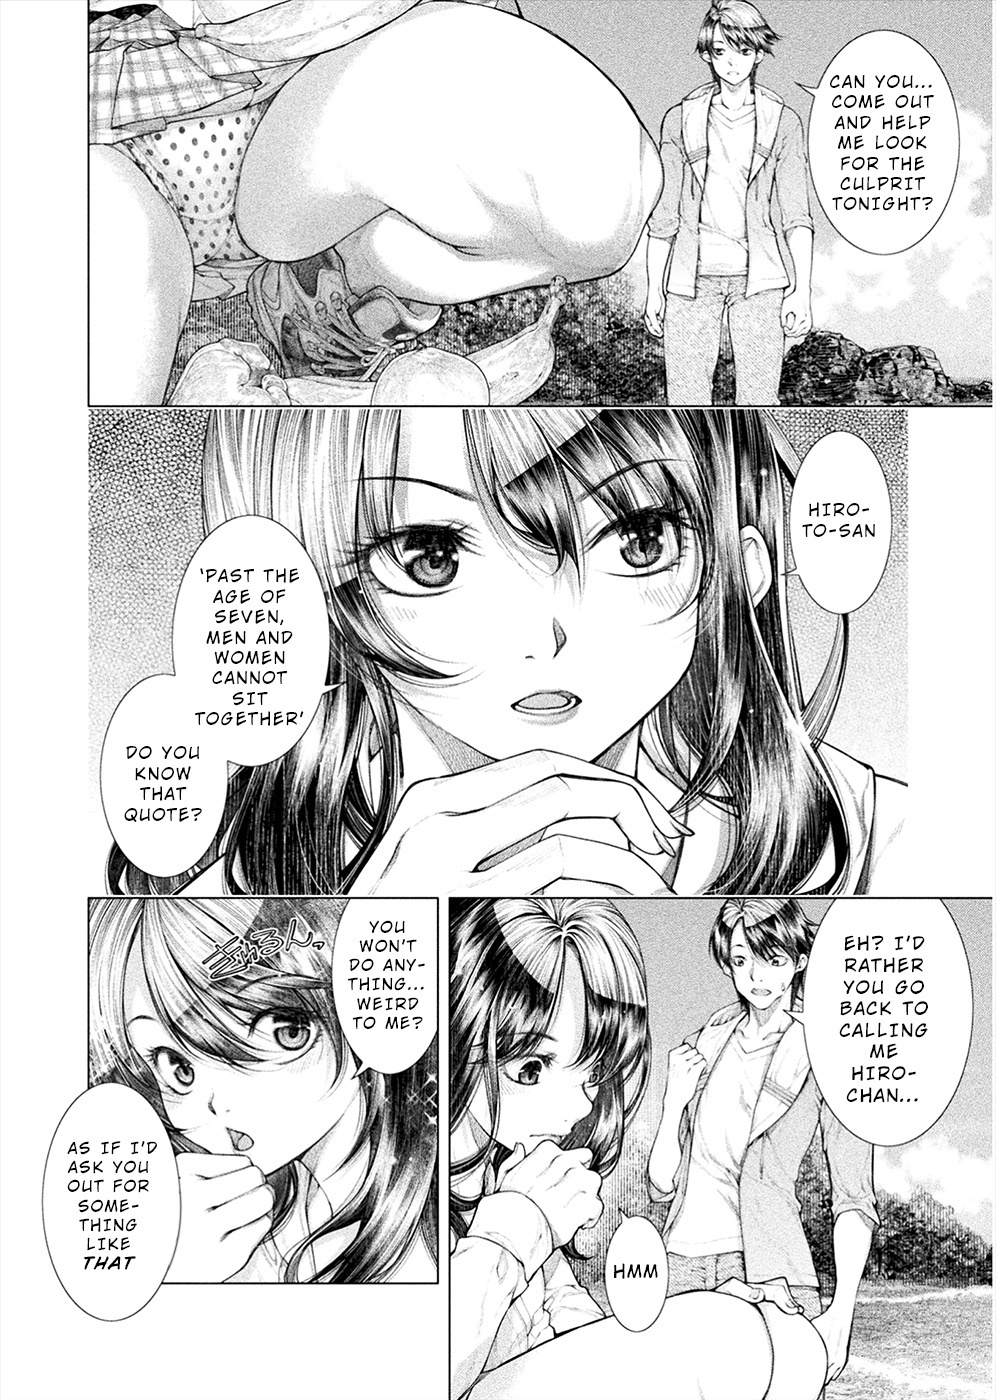 Lovetrap Island - Passion In Distant Lands - Chapter 8 #18